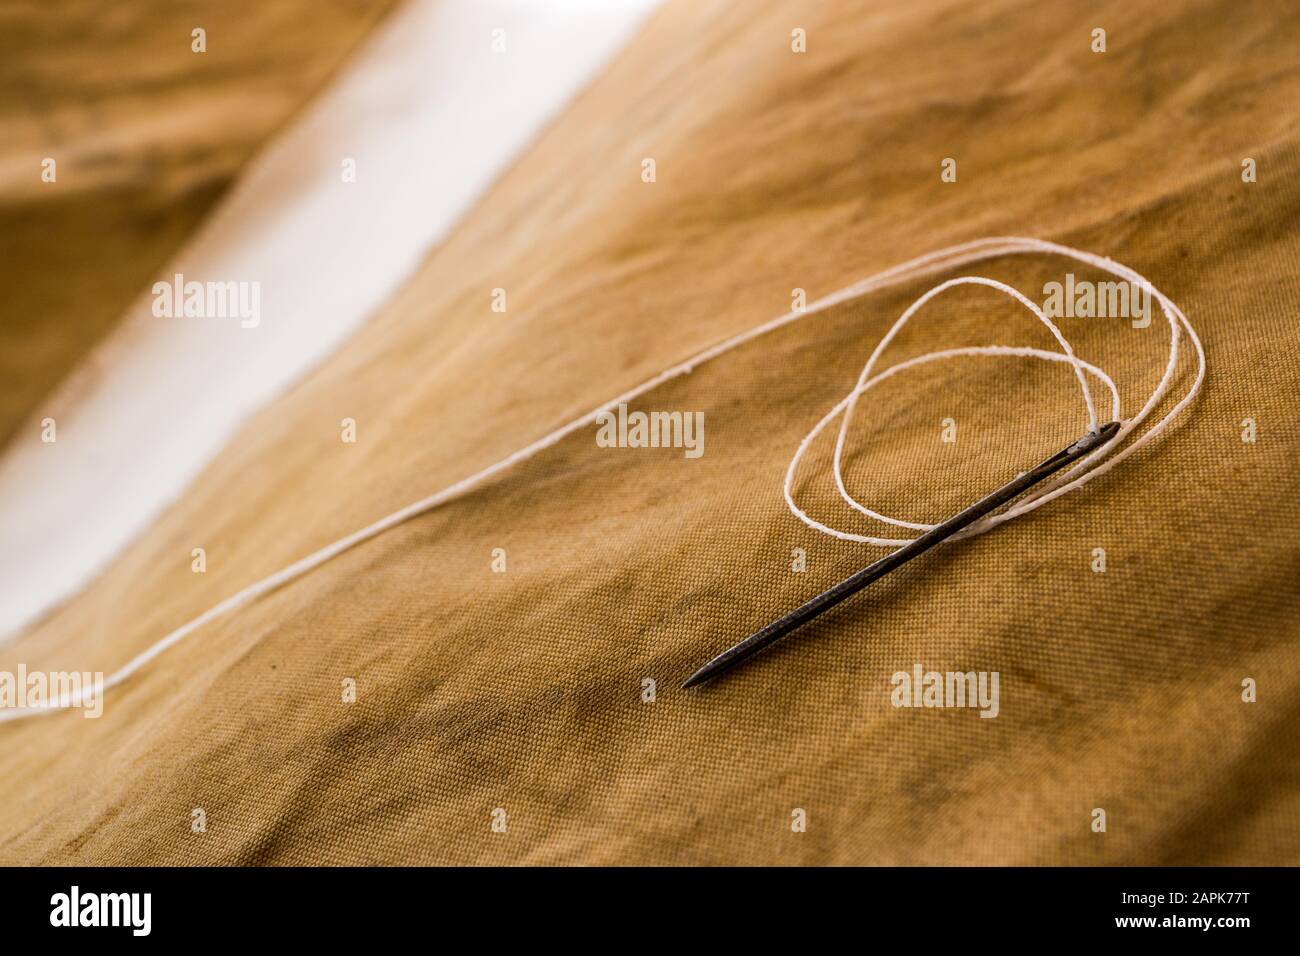 Old sewing needle Stock Photo